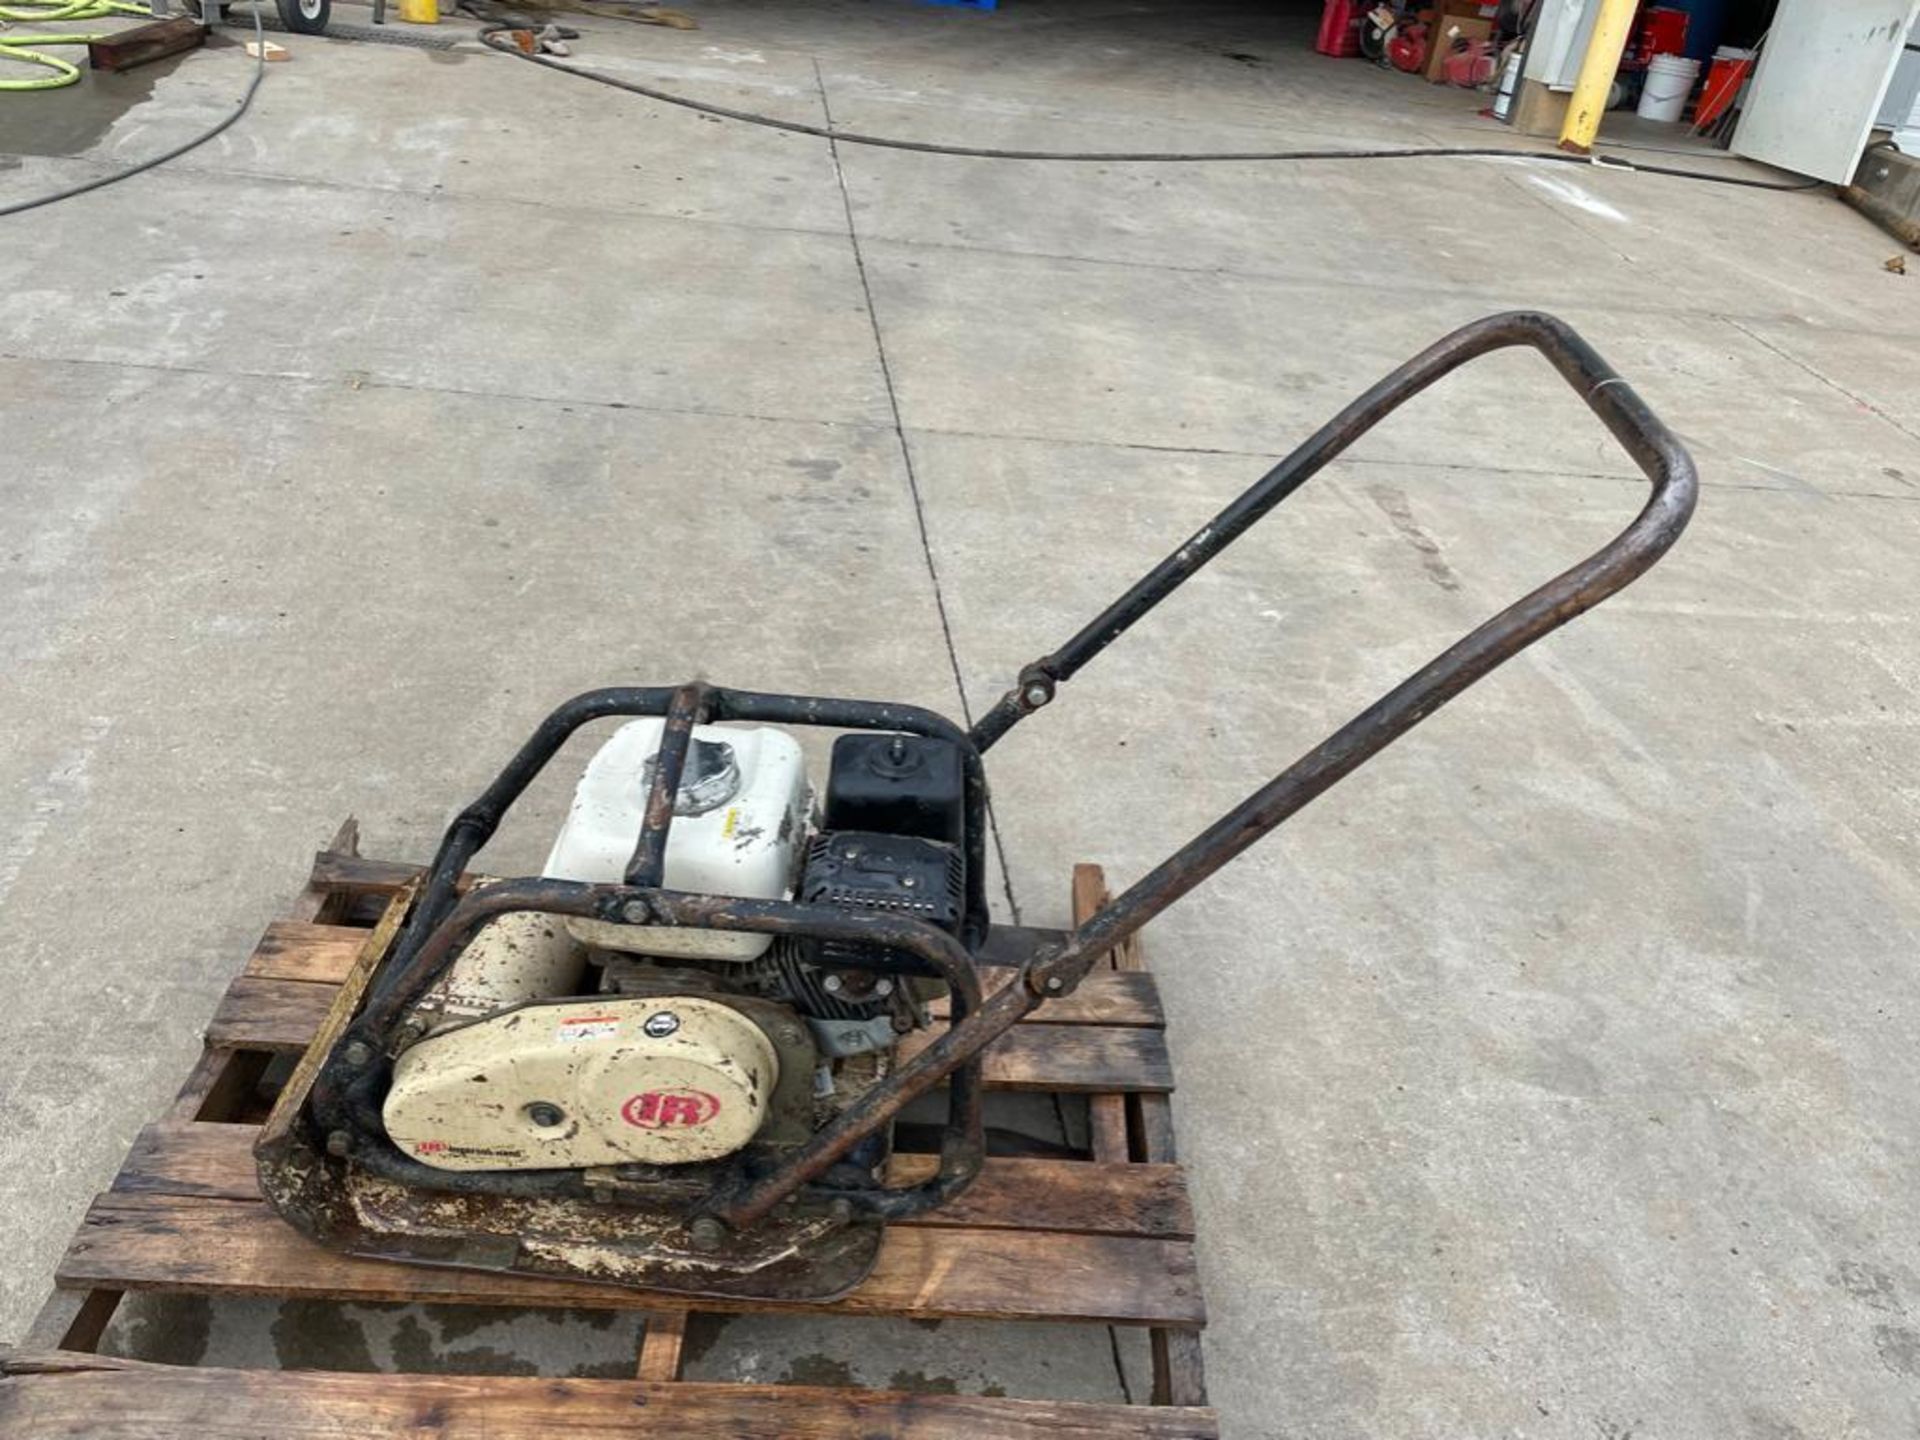 Ingersoll-Rand Plate Compactor, Honda GX160 Engine. Located in Hazelwood, MO